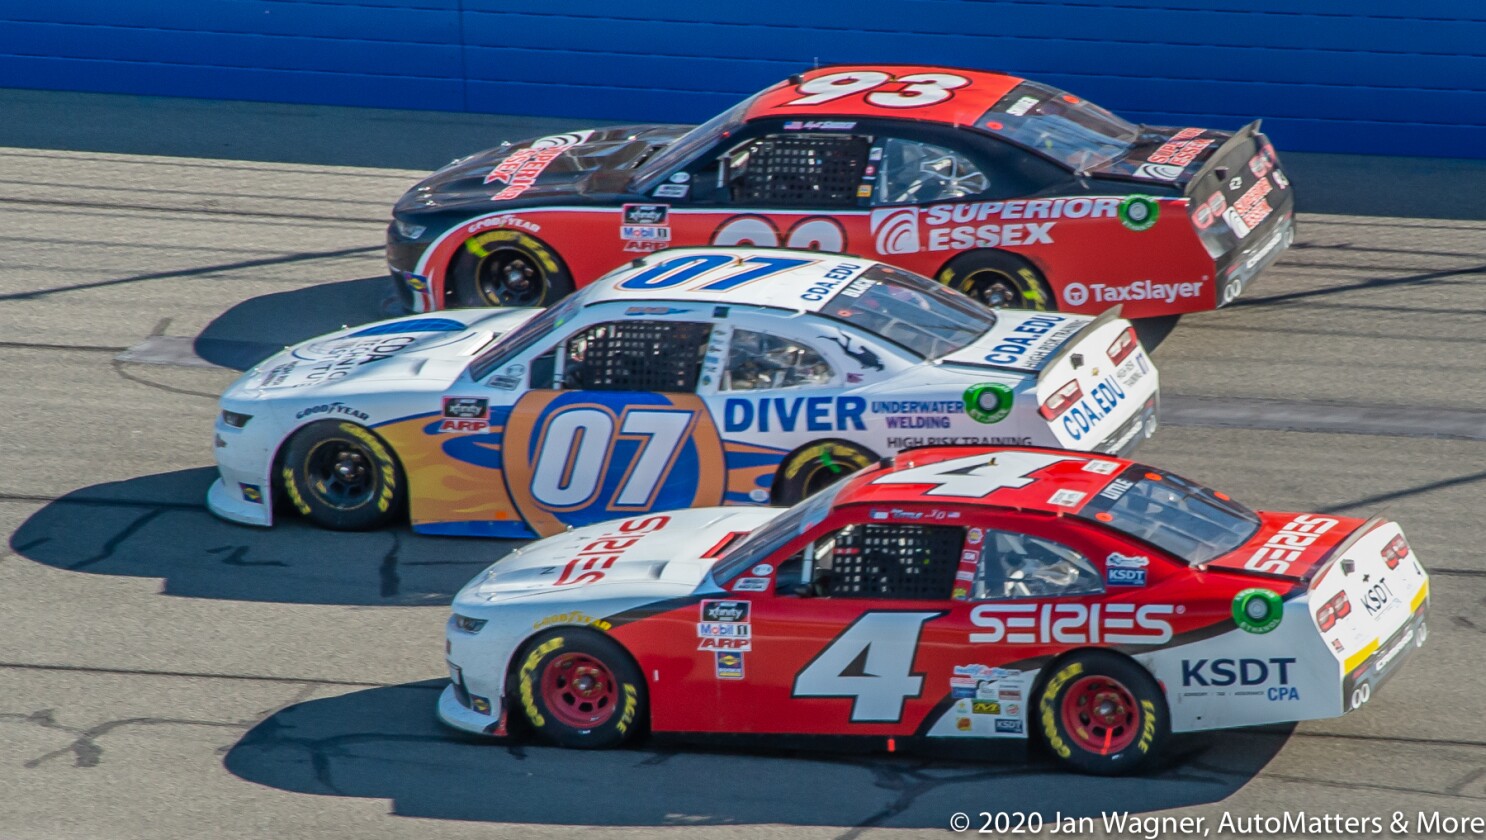 Automatters More Nascar Racing Returns To Auto Club Speedway Jimmie Johnson Bids Farewell Del Mar Times